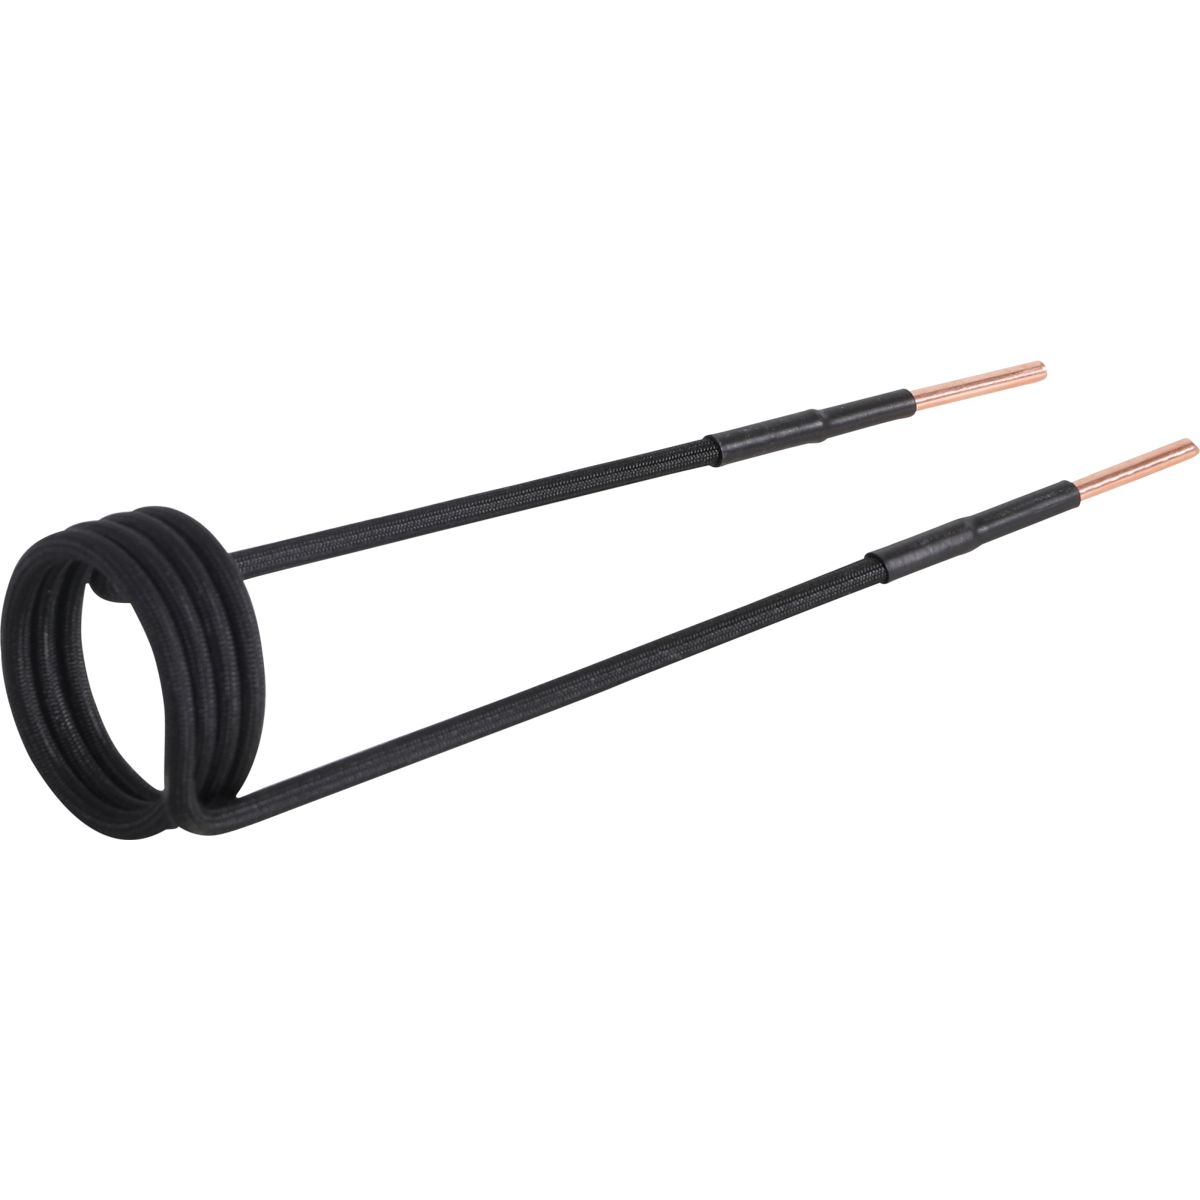 Induction Coil for Induction Heater | 38 mm | angled 90° | for BGS 2169, 3390, 3391